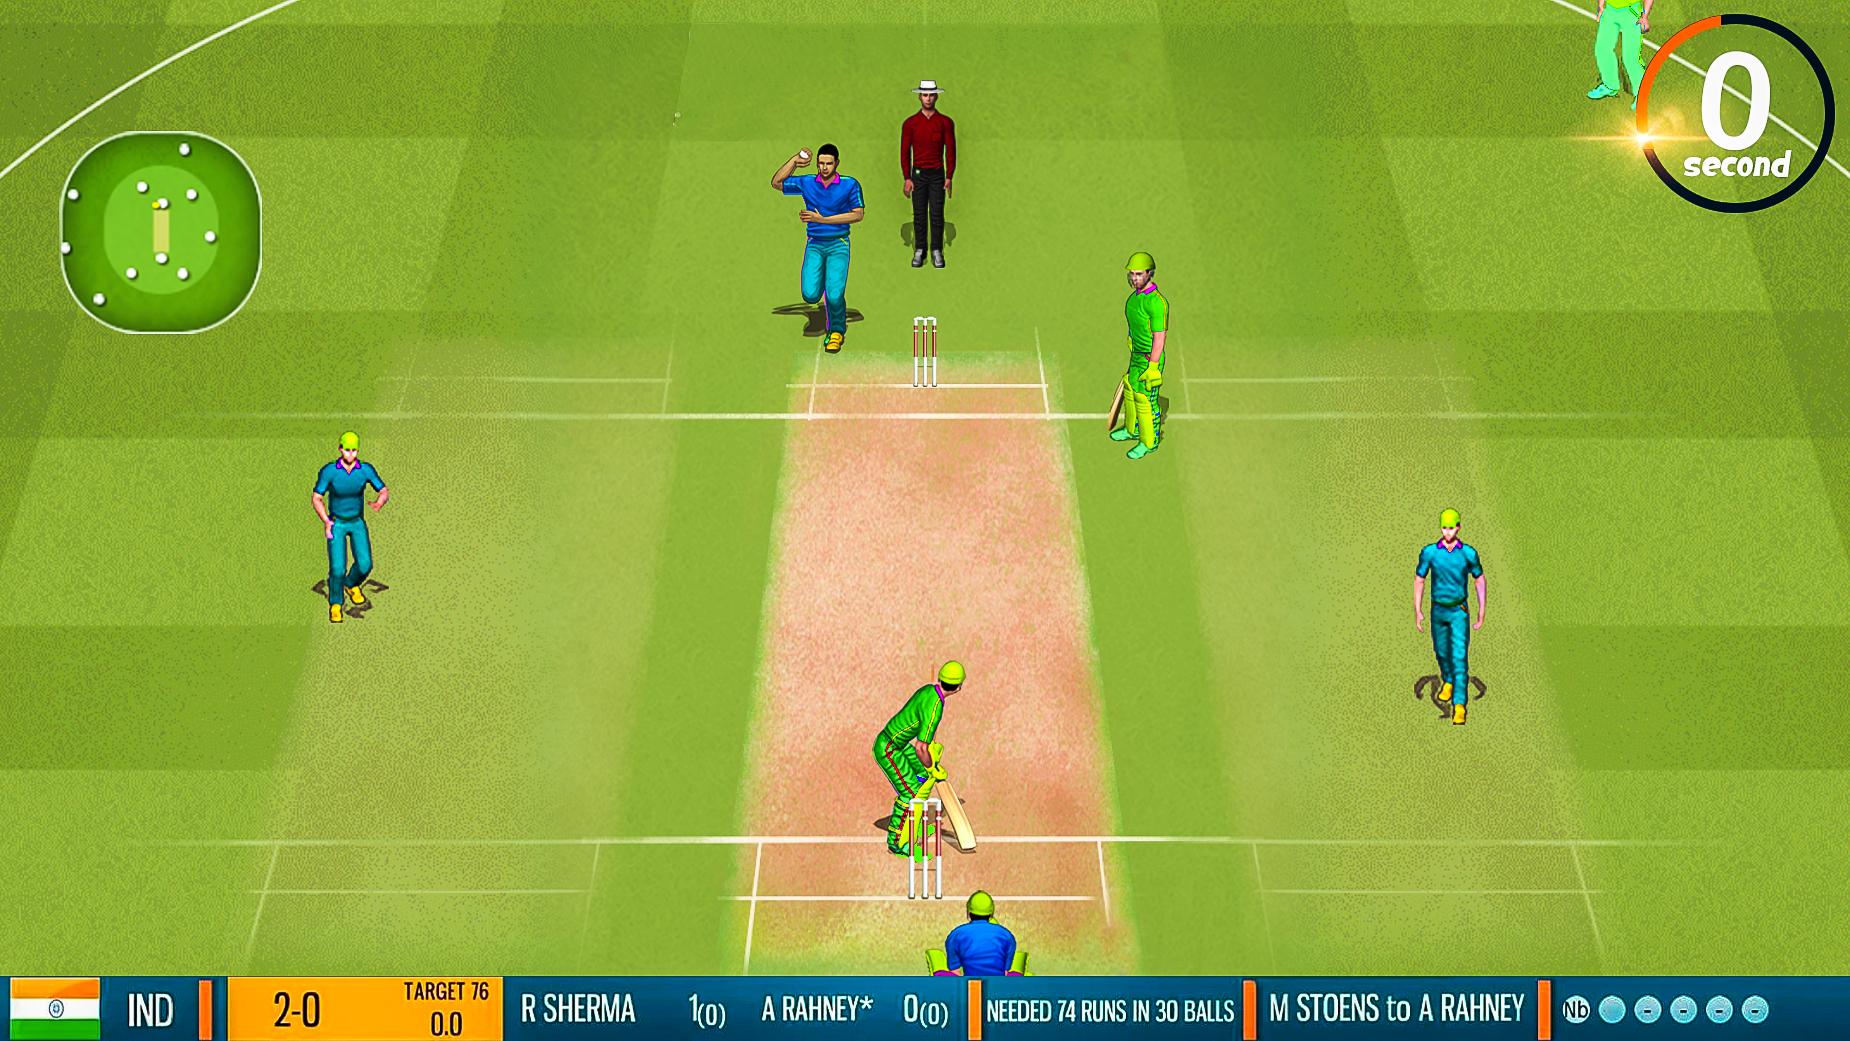 Play With Friends-Real Cricket Craze 1.1 Screenshot 6